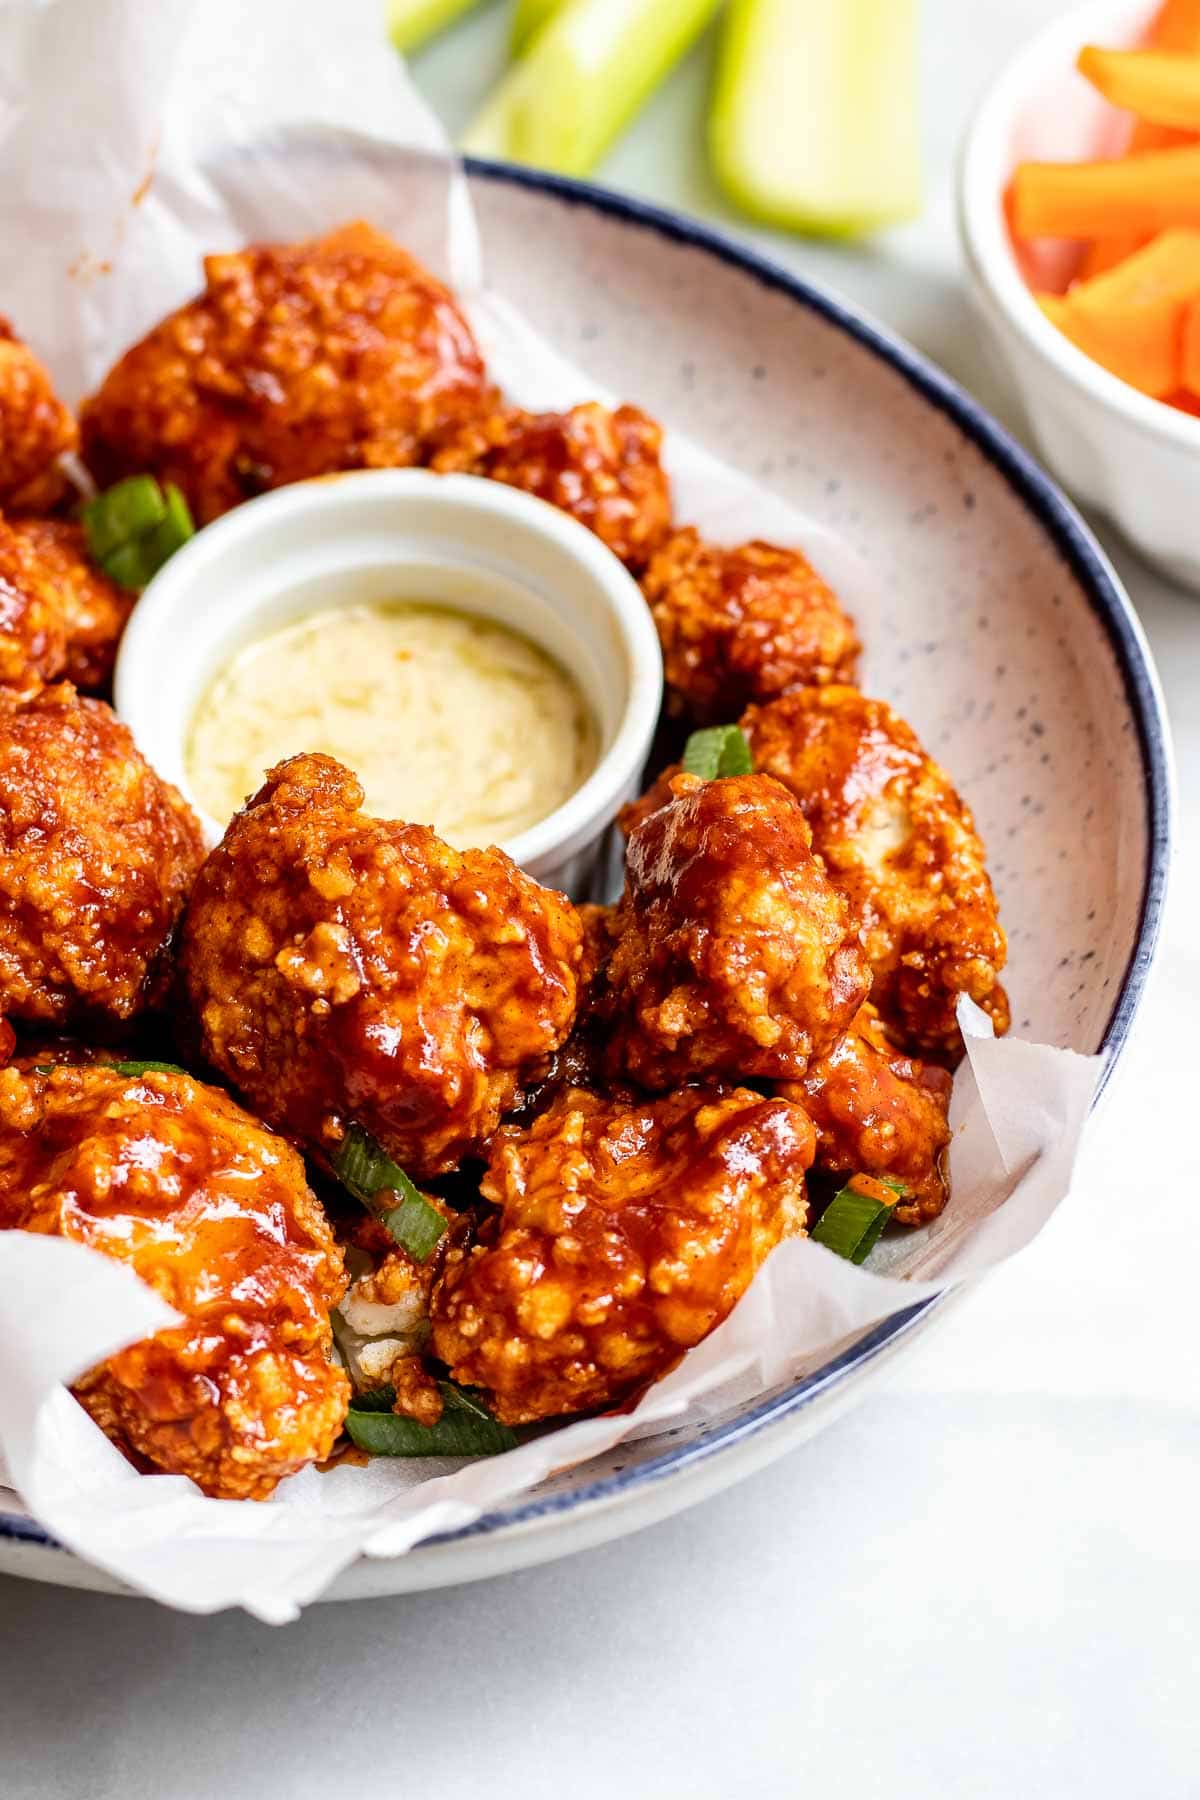 Up close image of bbq cauliflower with ranch dip on the side.